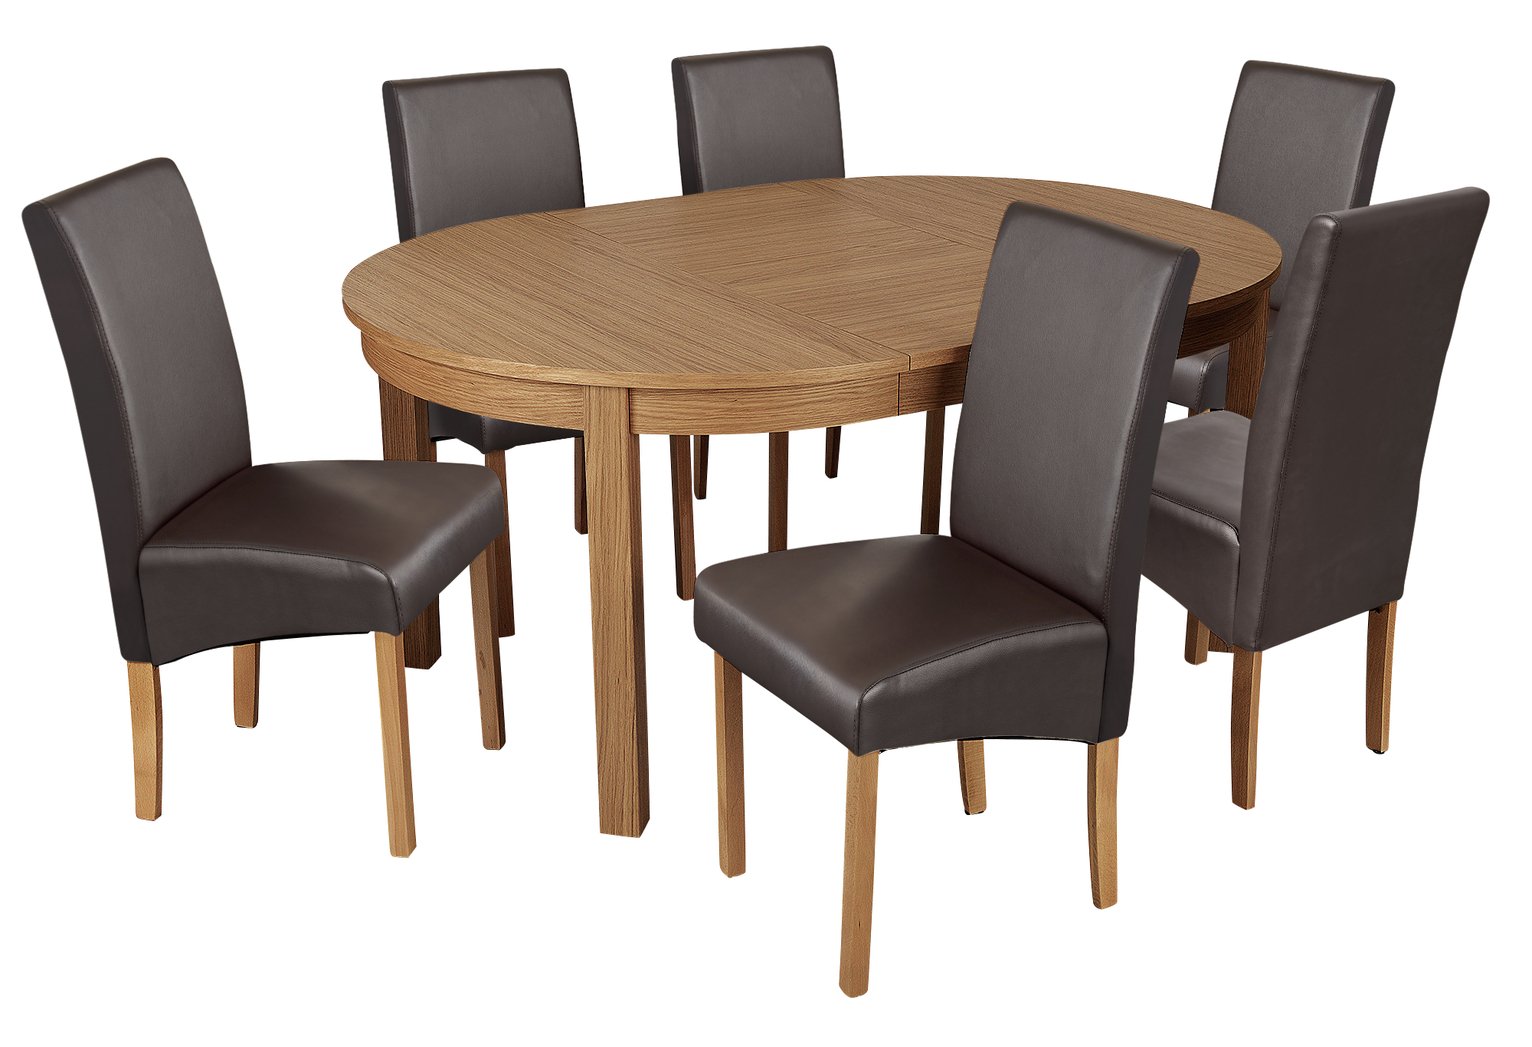 Argos Home Clifton Oak Extending Table & 6 Chocolate Chairs